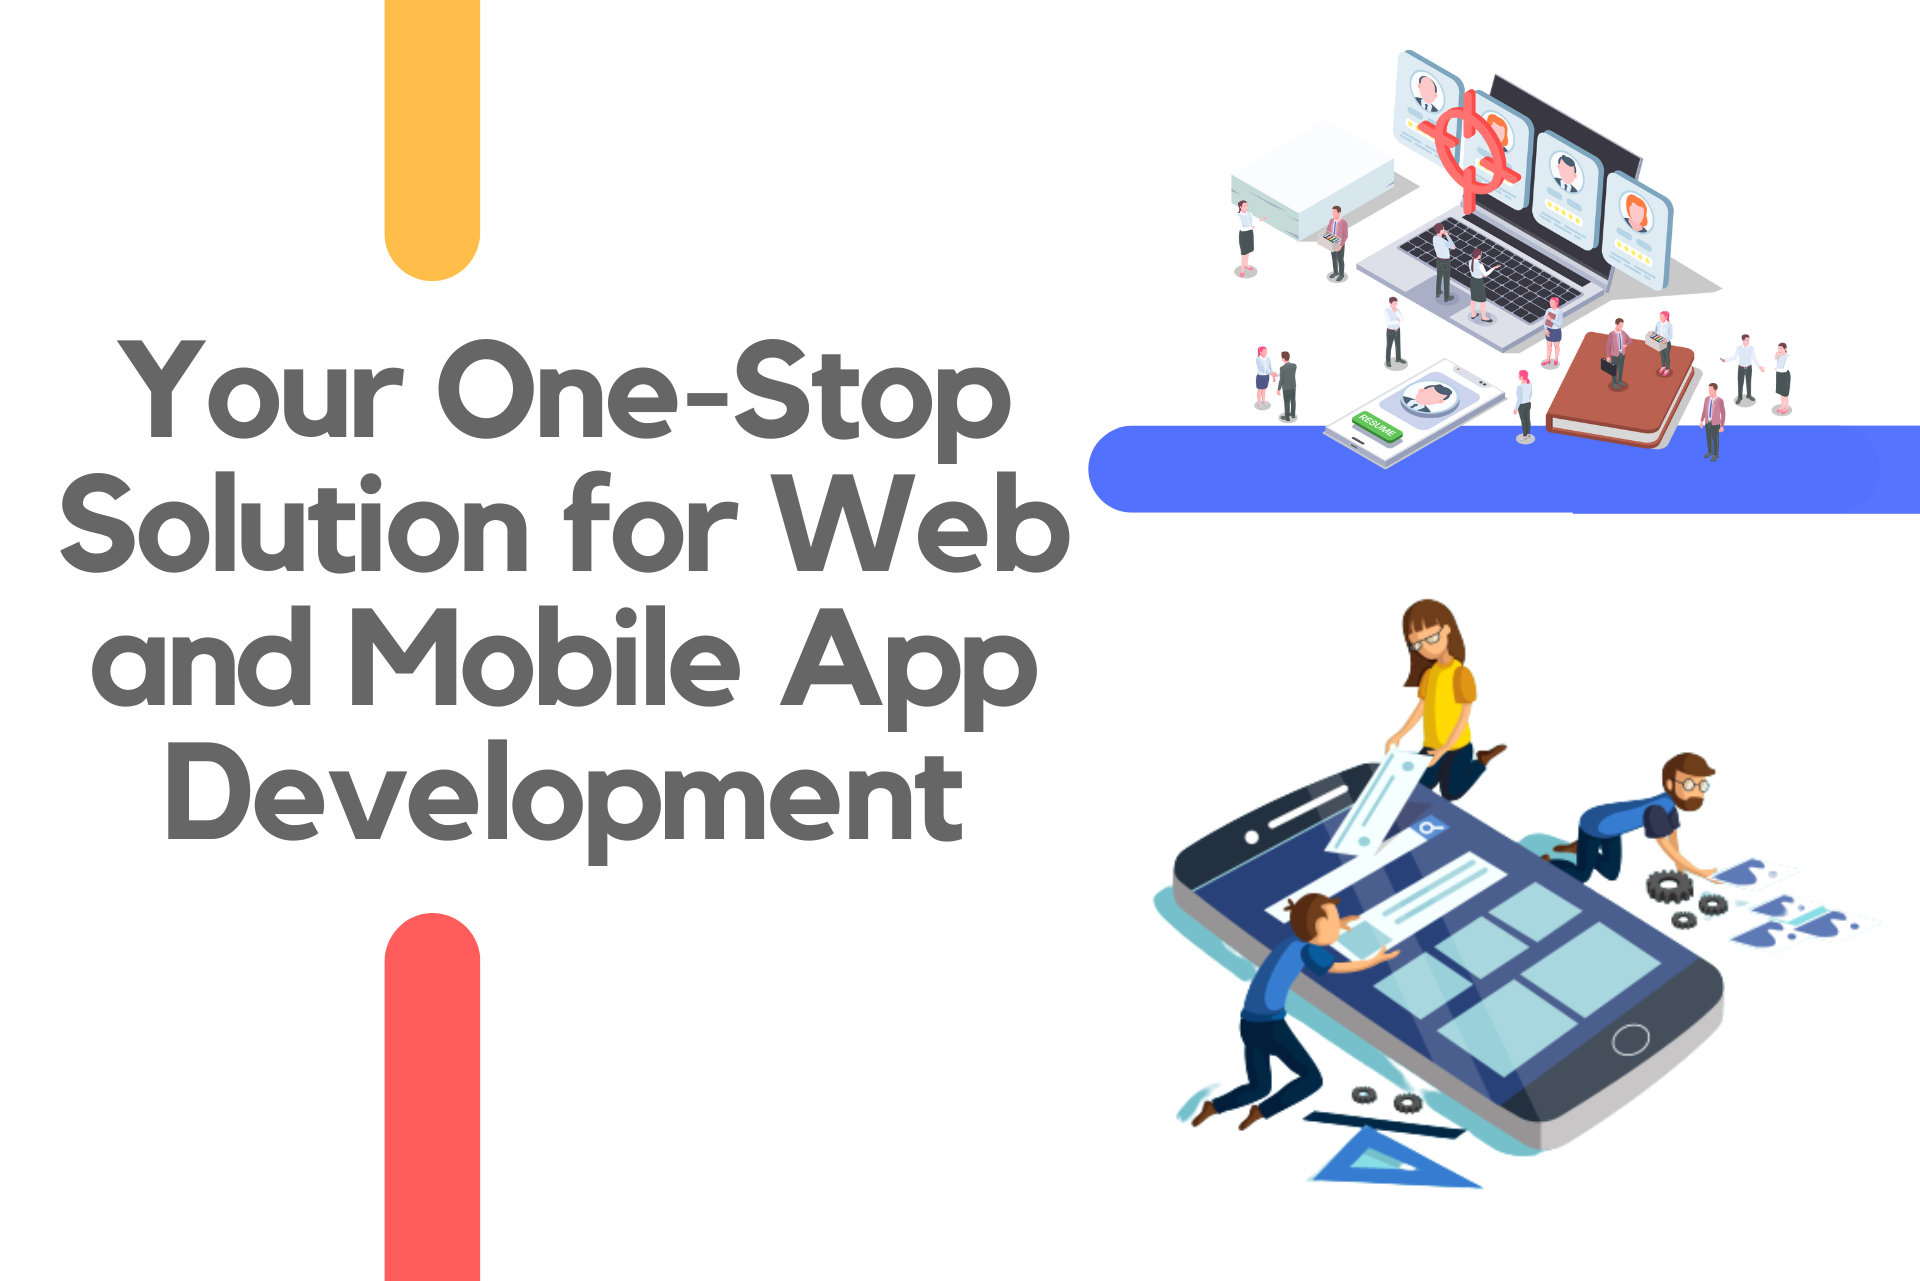 Your One-Stop Solution for Web and Mobile App Development